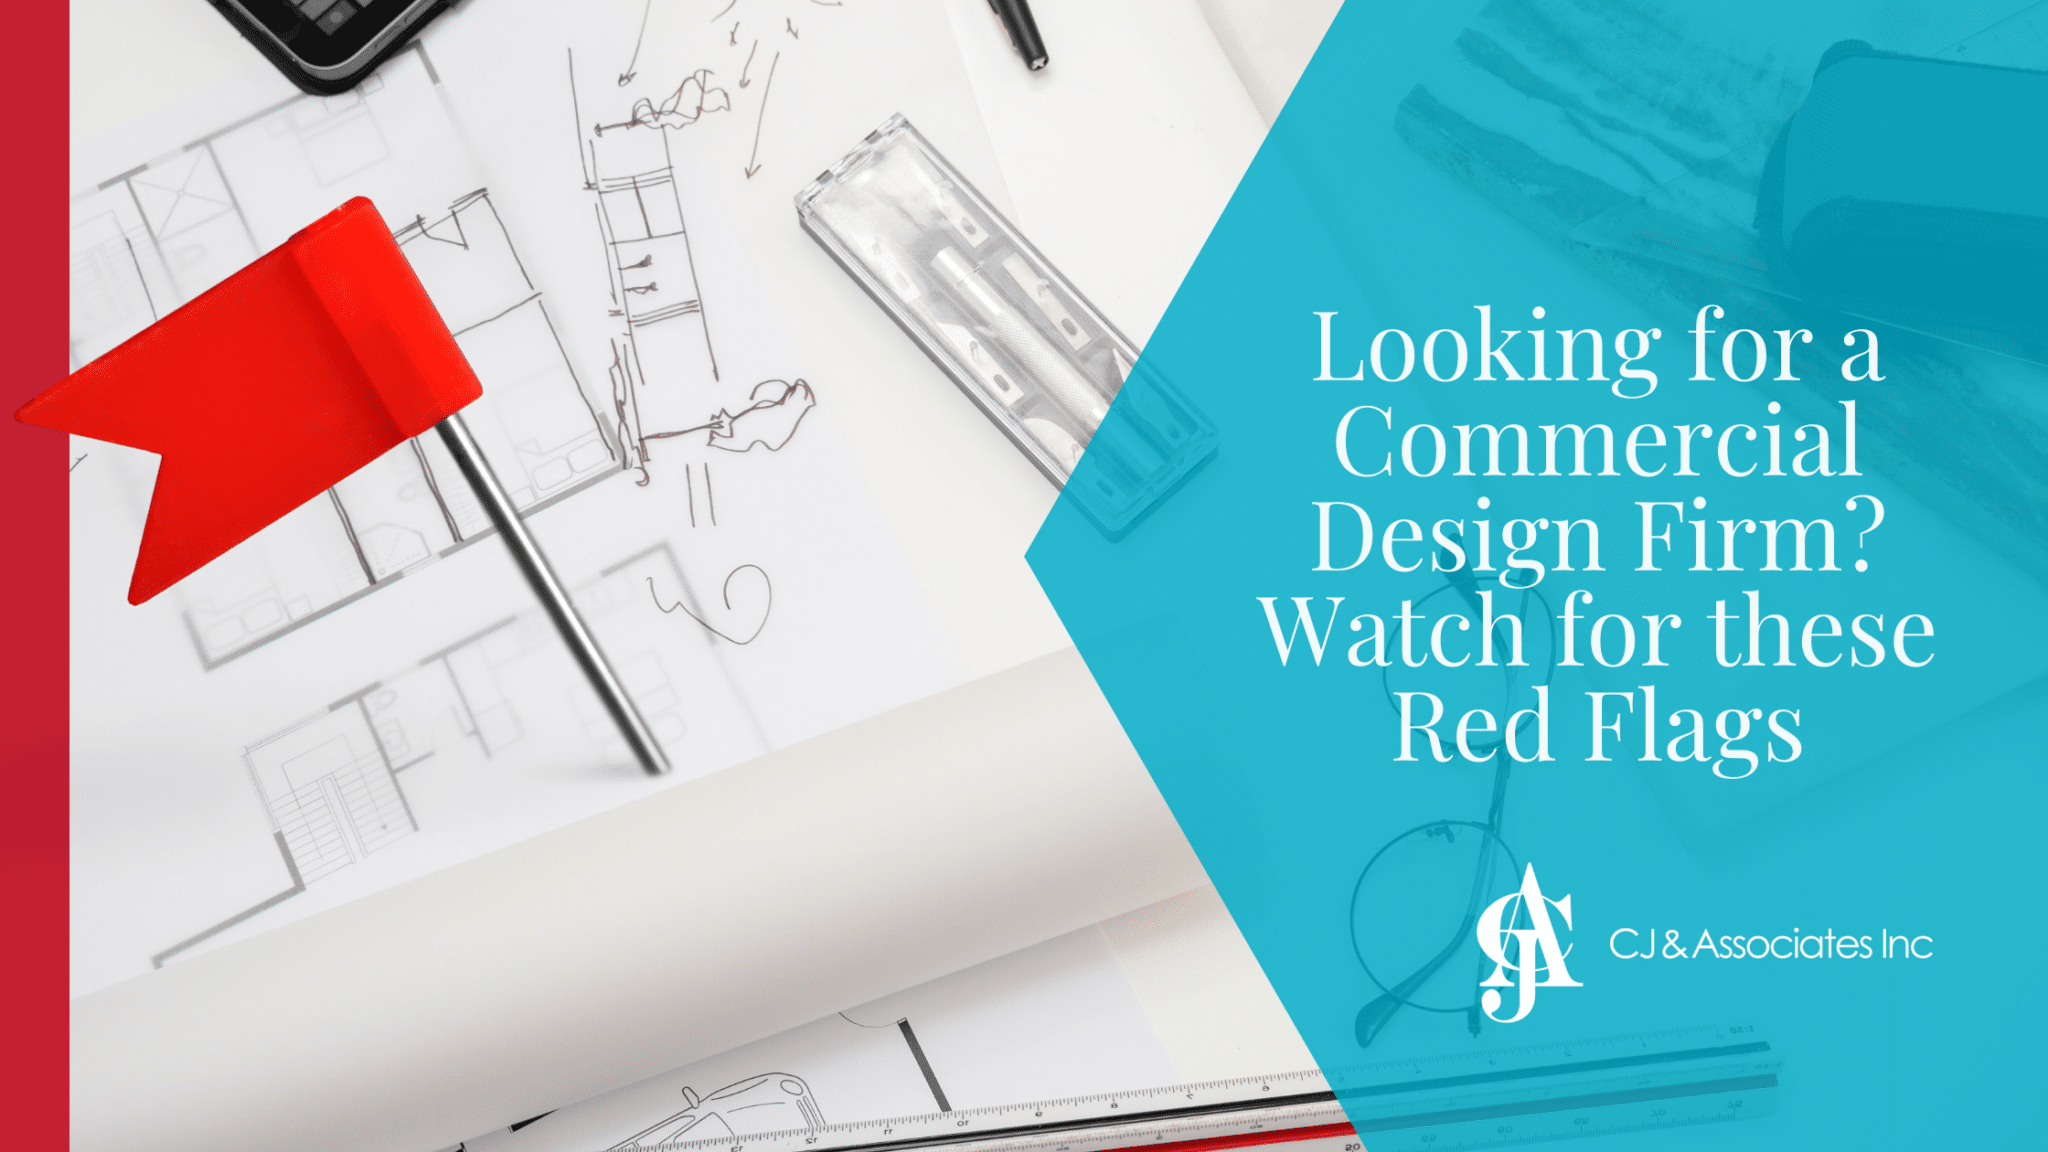 An up close image of design plans with a red flag with the blog title "Looking for a Commercial Design Firm? Watch for these Red Flags" in white text on a blue background with a white CJ & Associates logo.